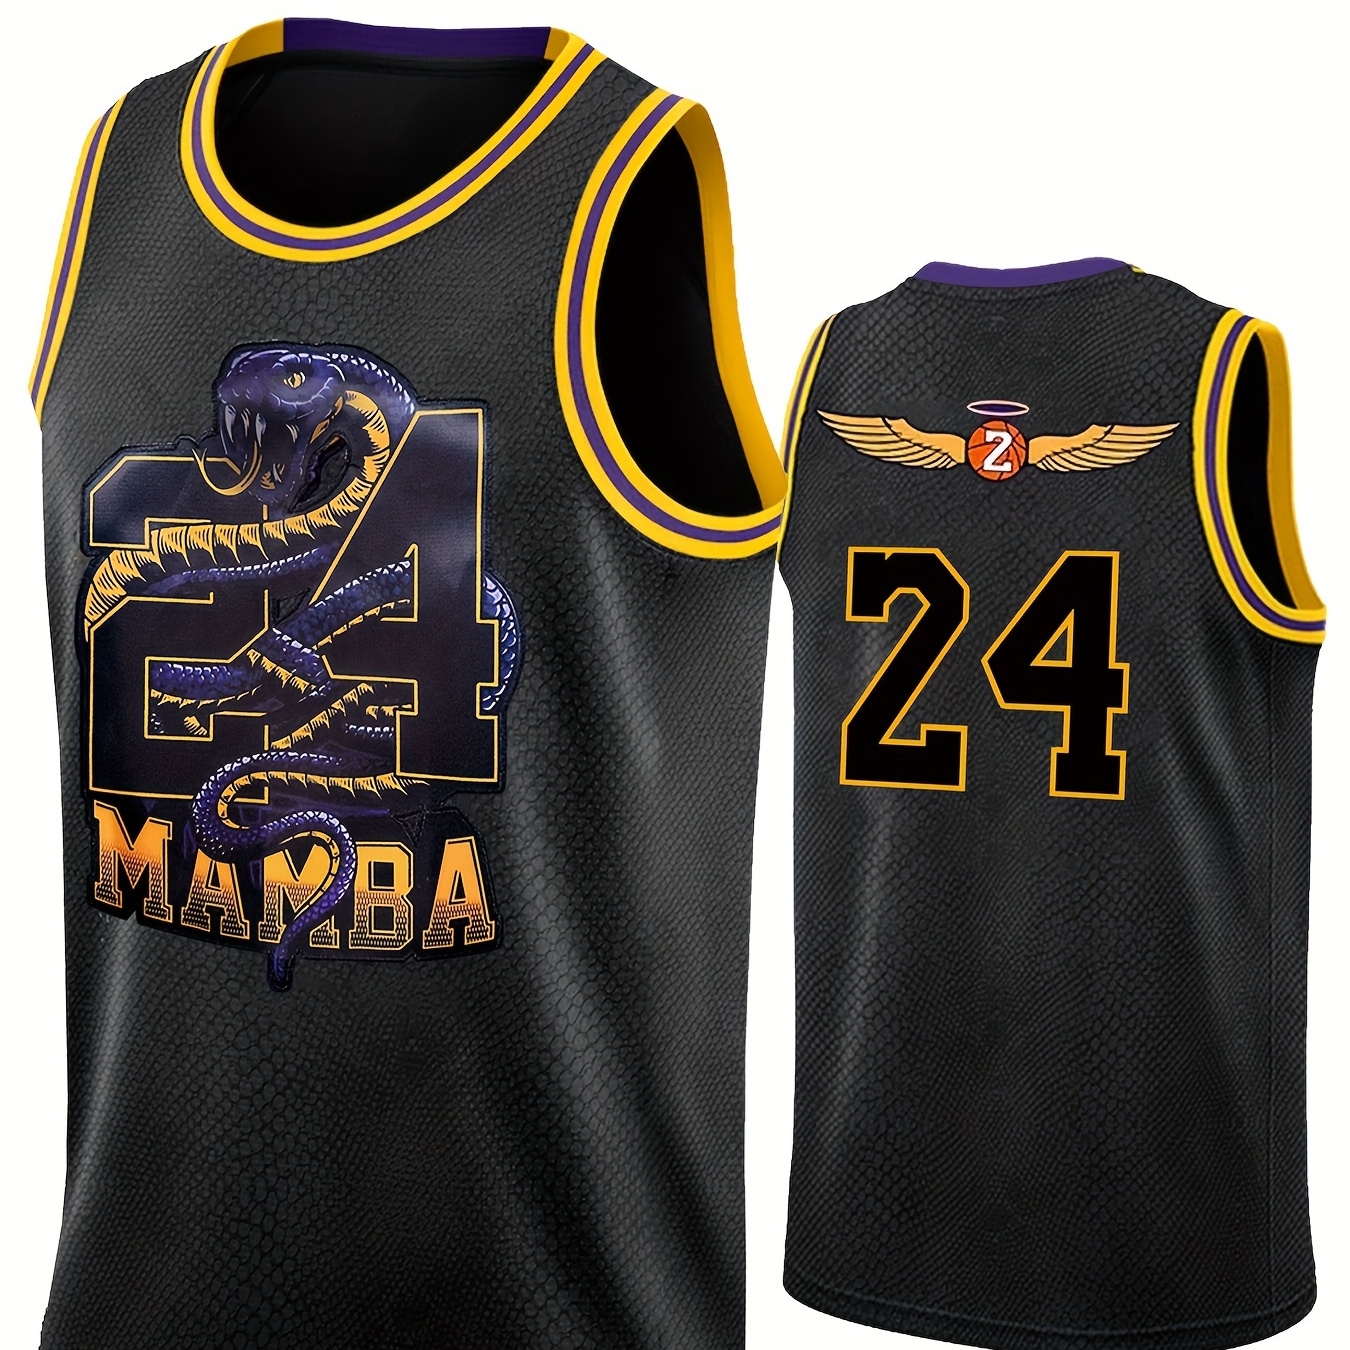 

High Quality Embroidered Basketball Jersey Men's Black Casual Jersey # 24 Snake Basketball Jersey Size S-xxxl